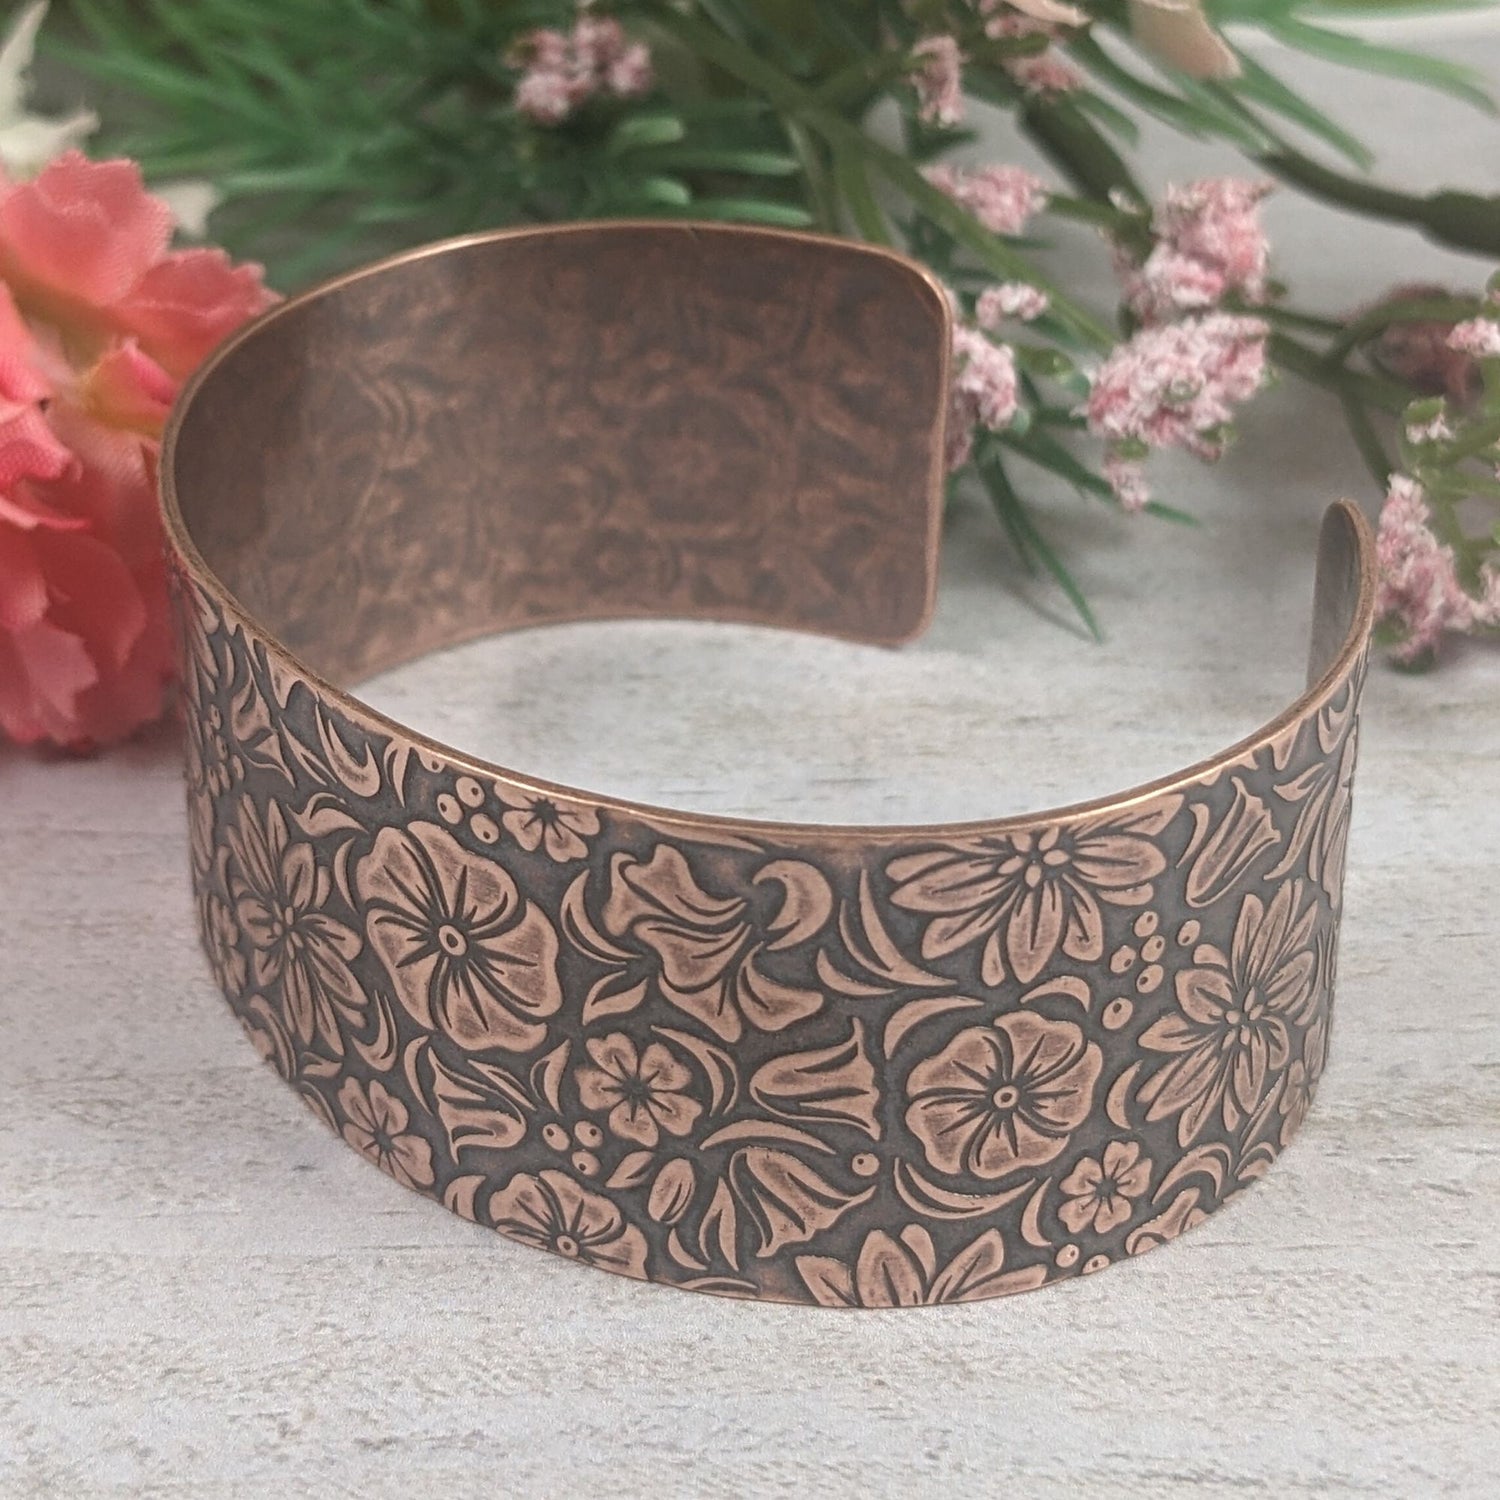 One inch wide copper cuff bracelet covered in designs of common garden flowers, looked at from above. The background around the flowers is darkened to accentuate the detail.